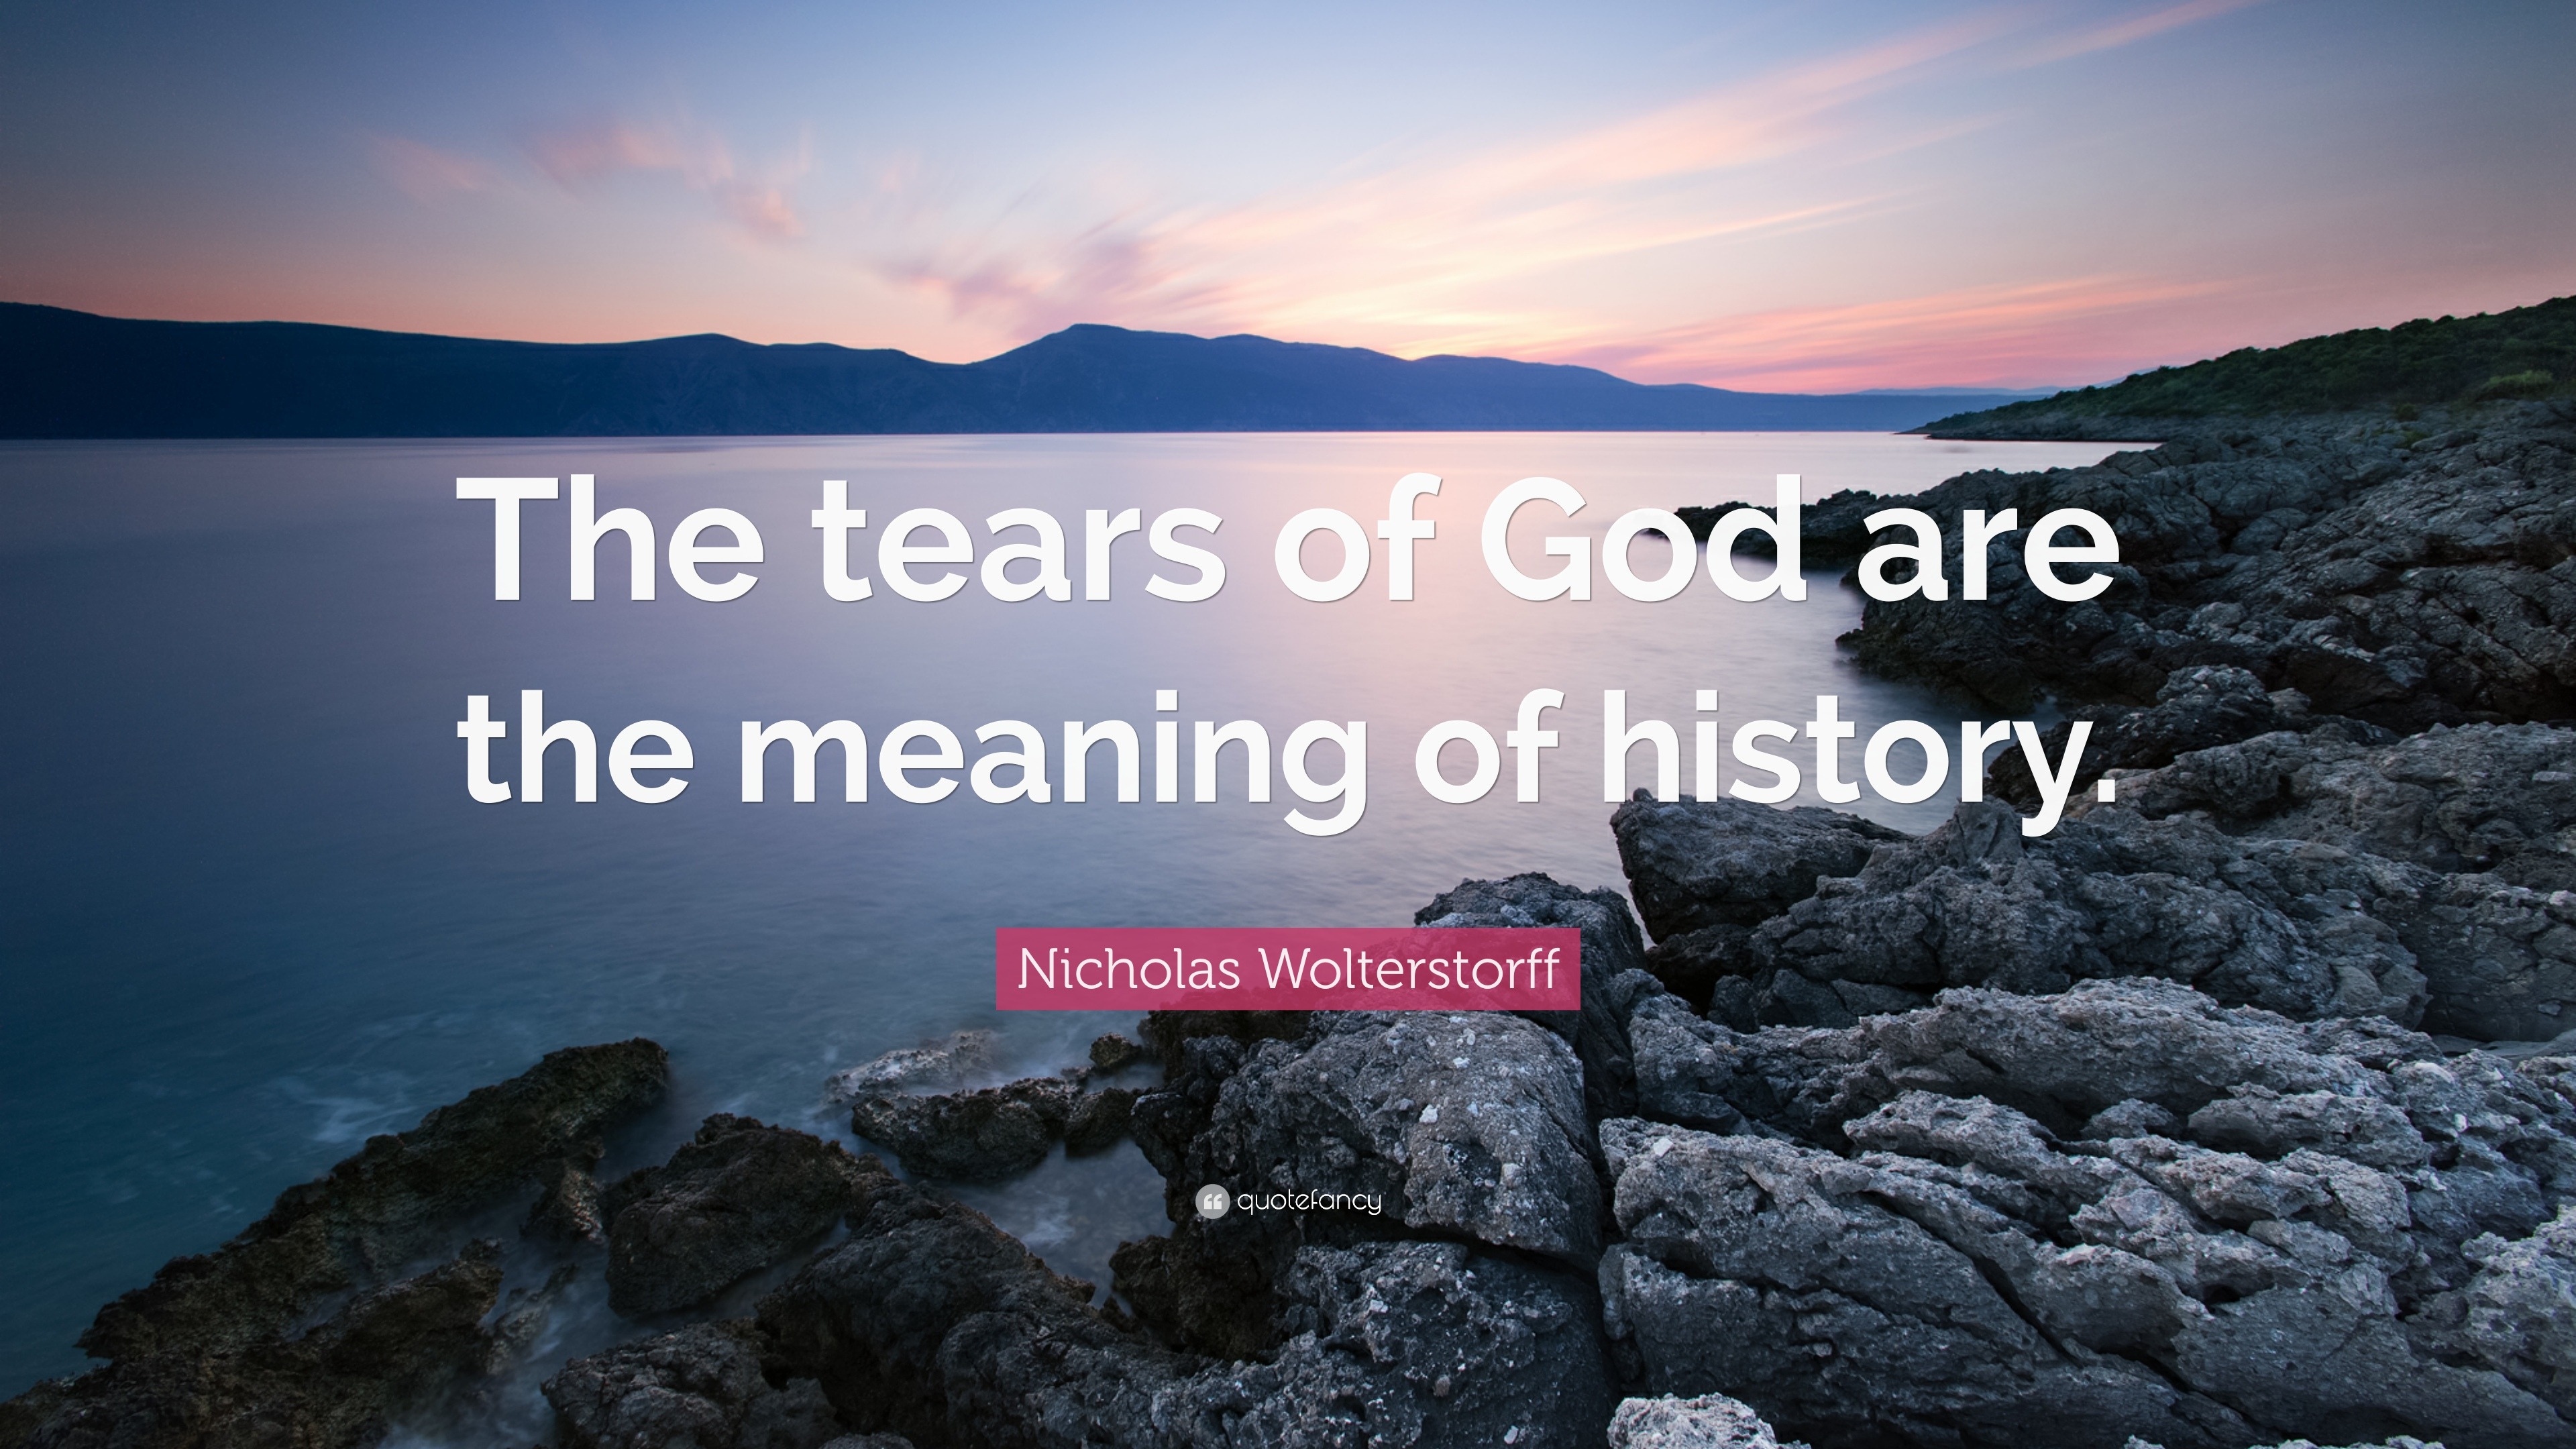 Nicholas Wolterstorff Quote: “The tears of God are the meaning of